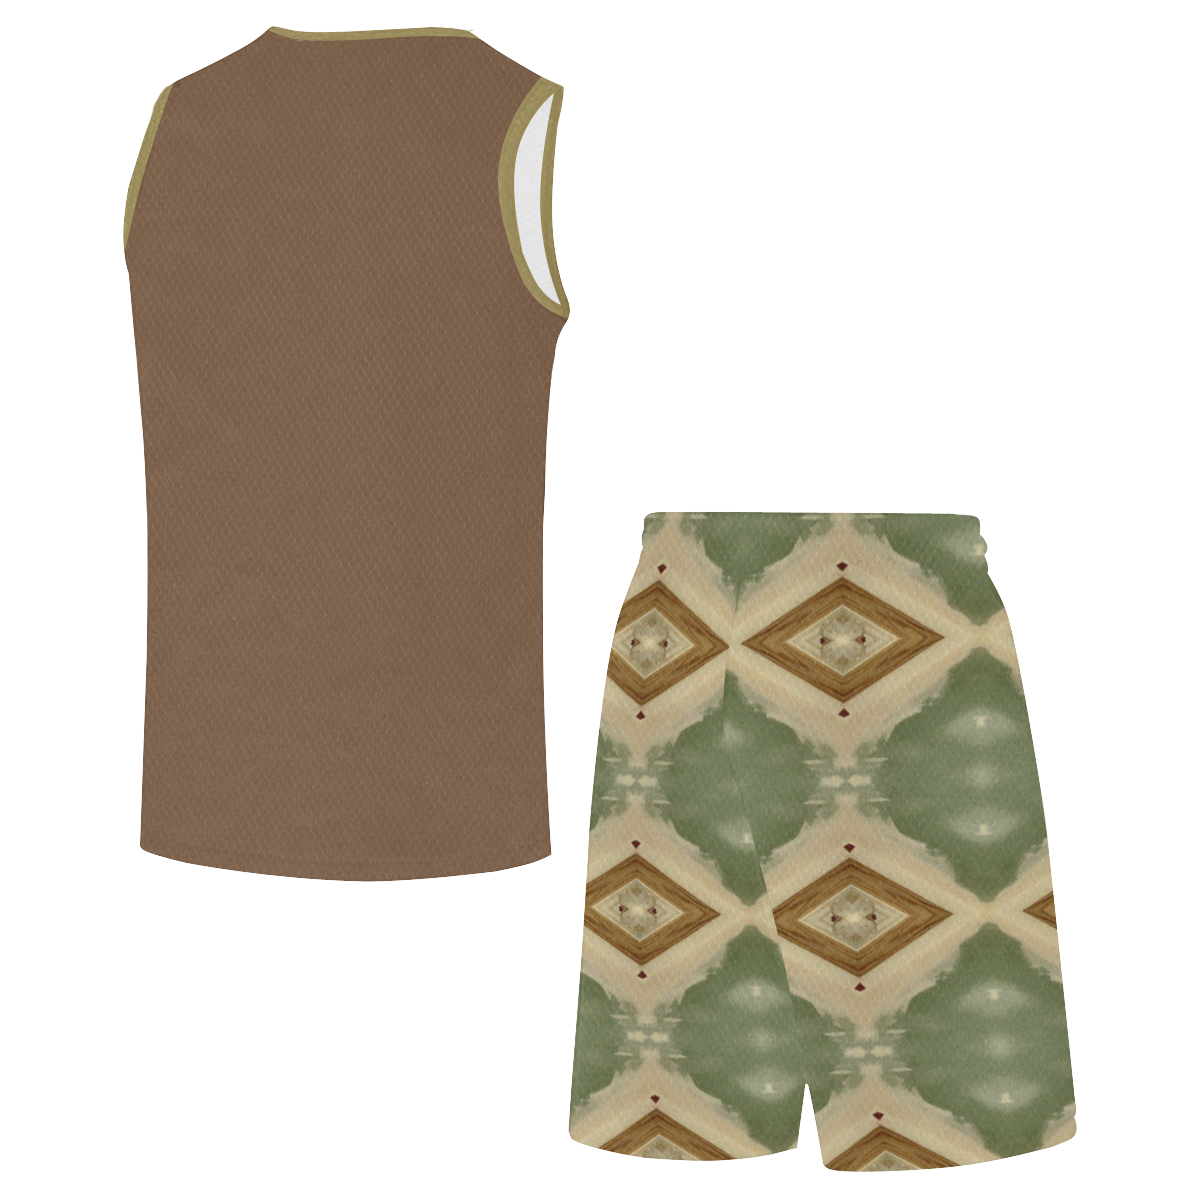 Geometric Camo shorts with brown top All Over Print Basketball Uniform